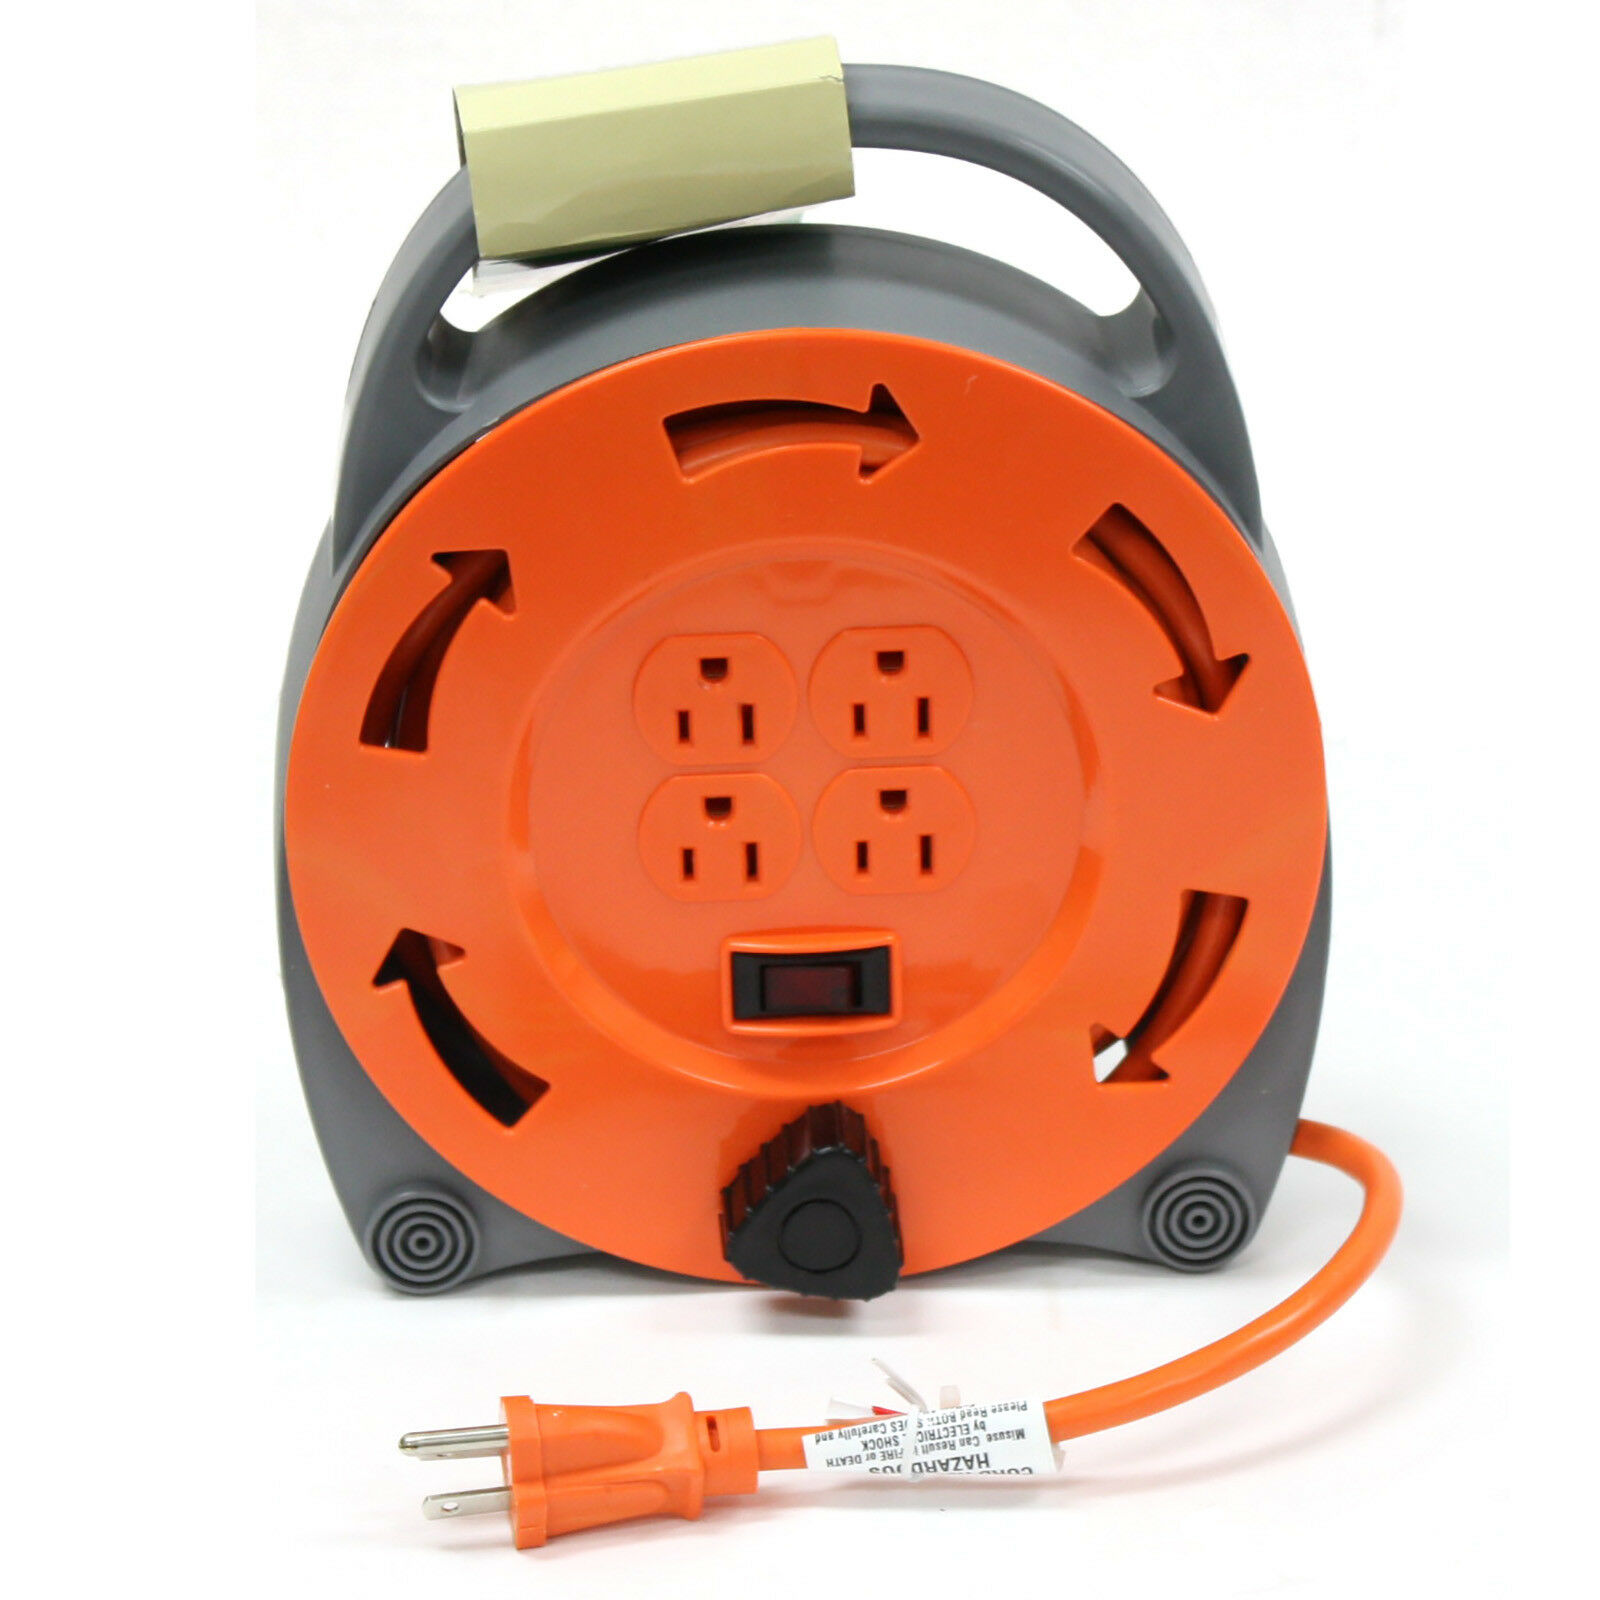 4 Outlet UL/CUL LISTED 20ft Hand Wind Cord Reel 13Amp Plug Retractable ...